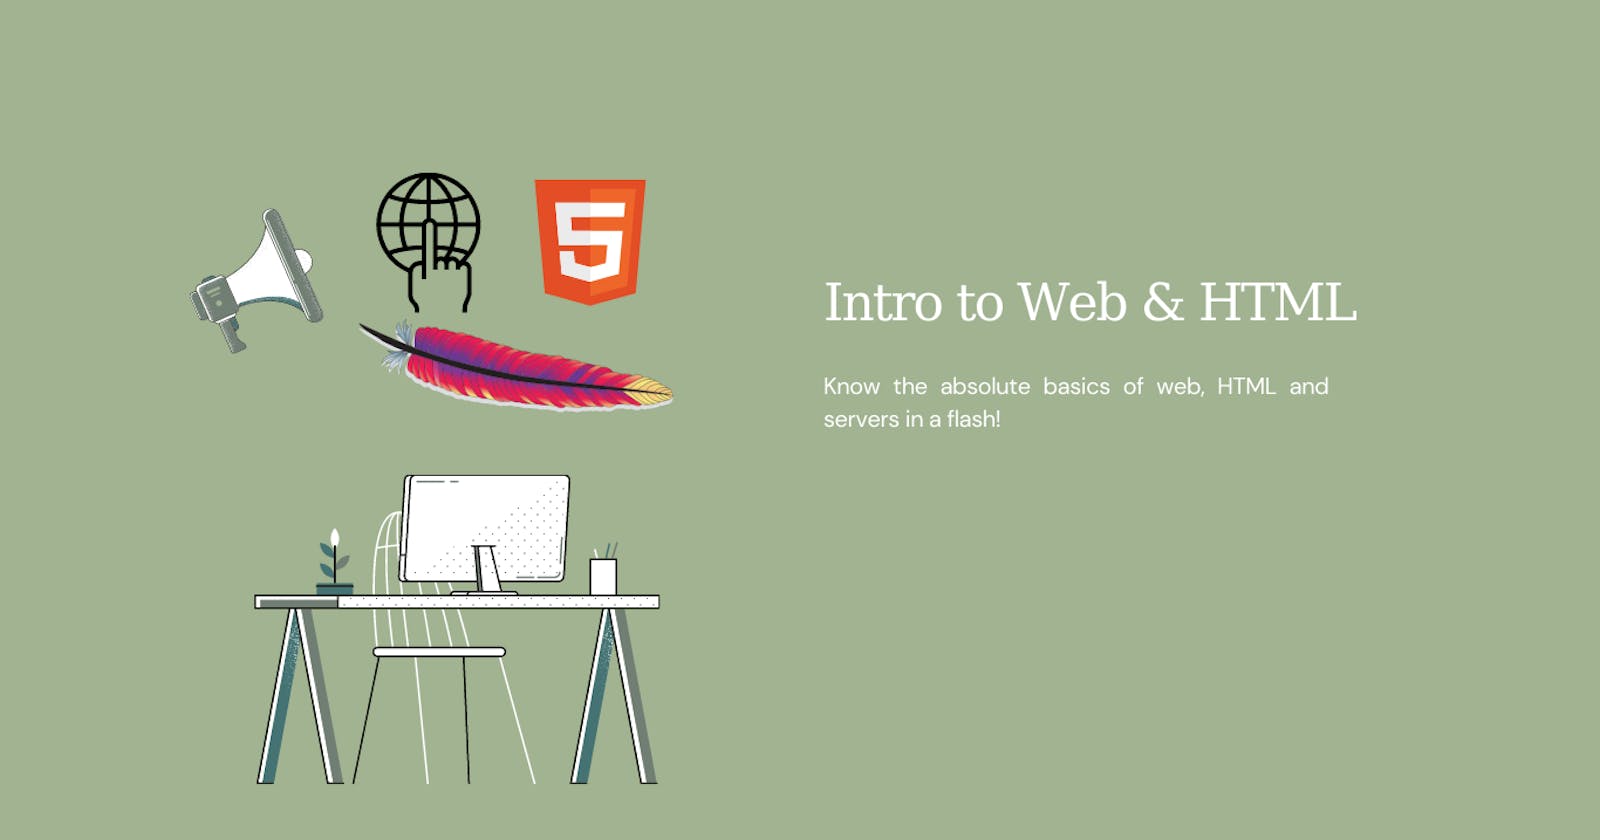 Introduction to Web & HTML